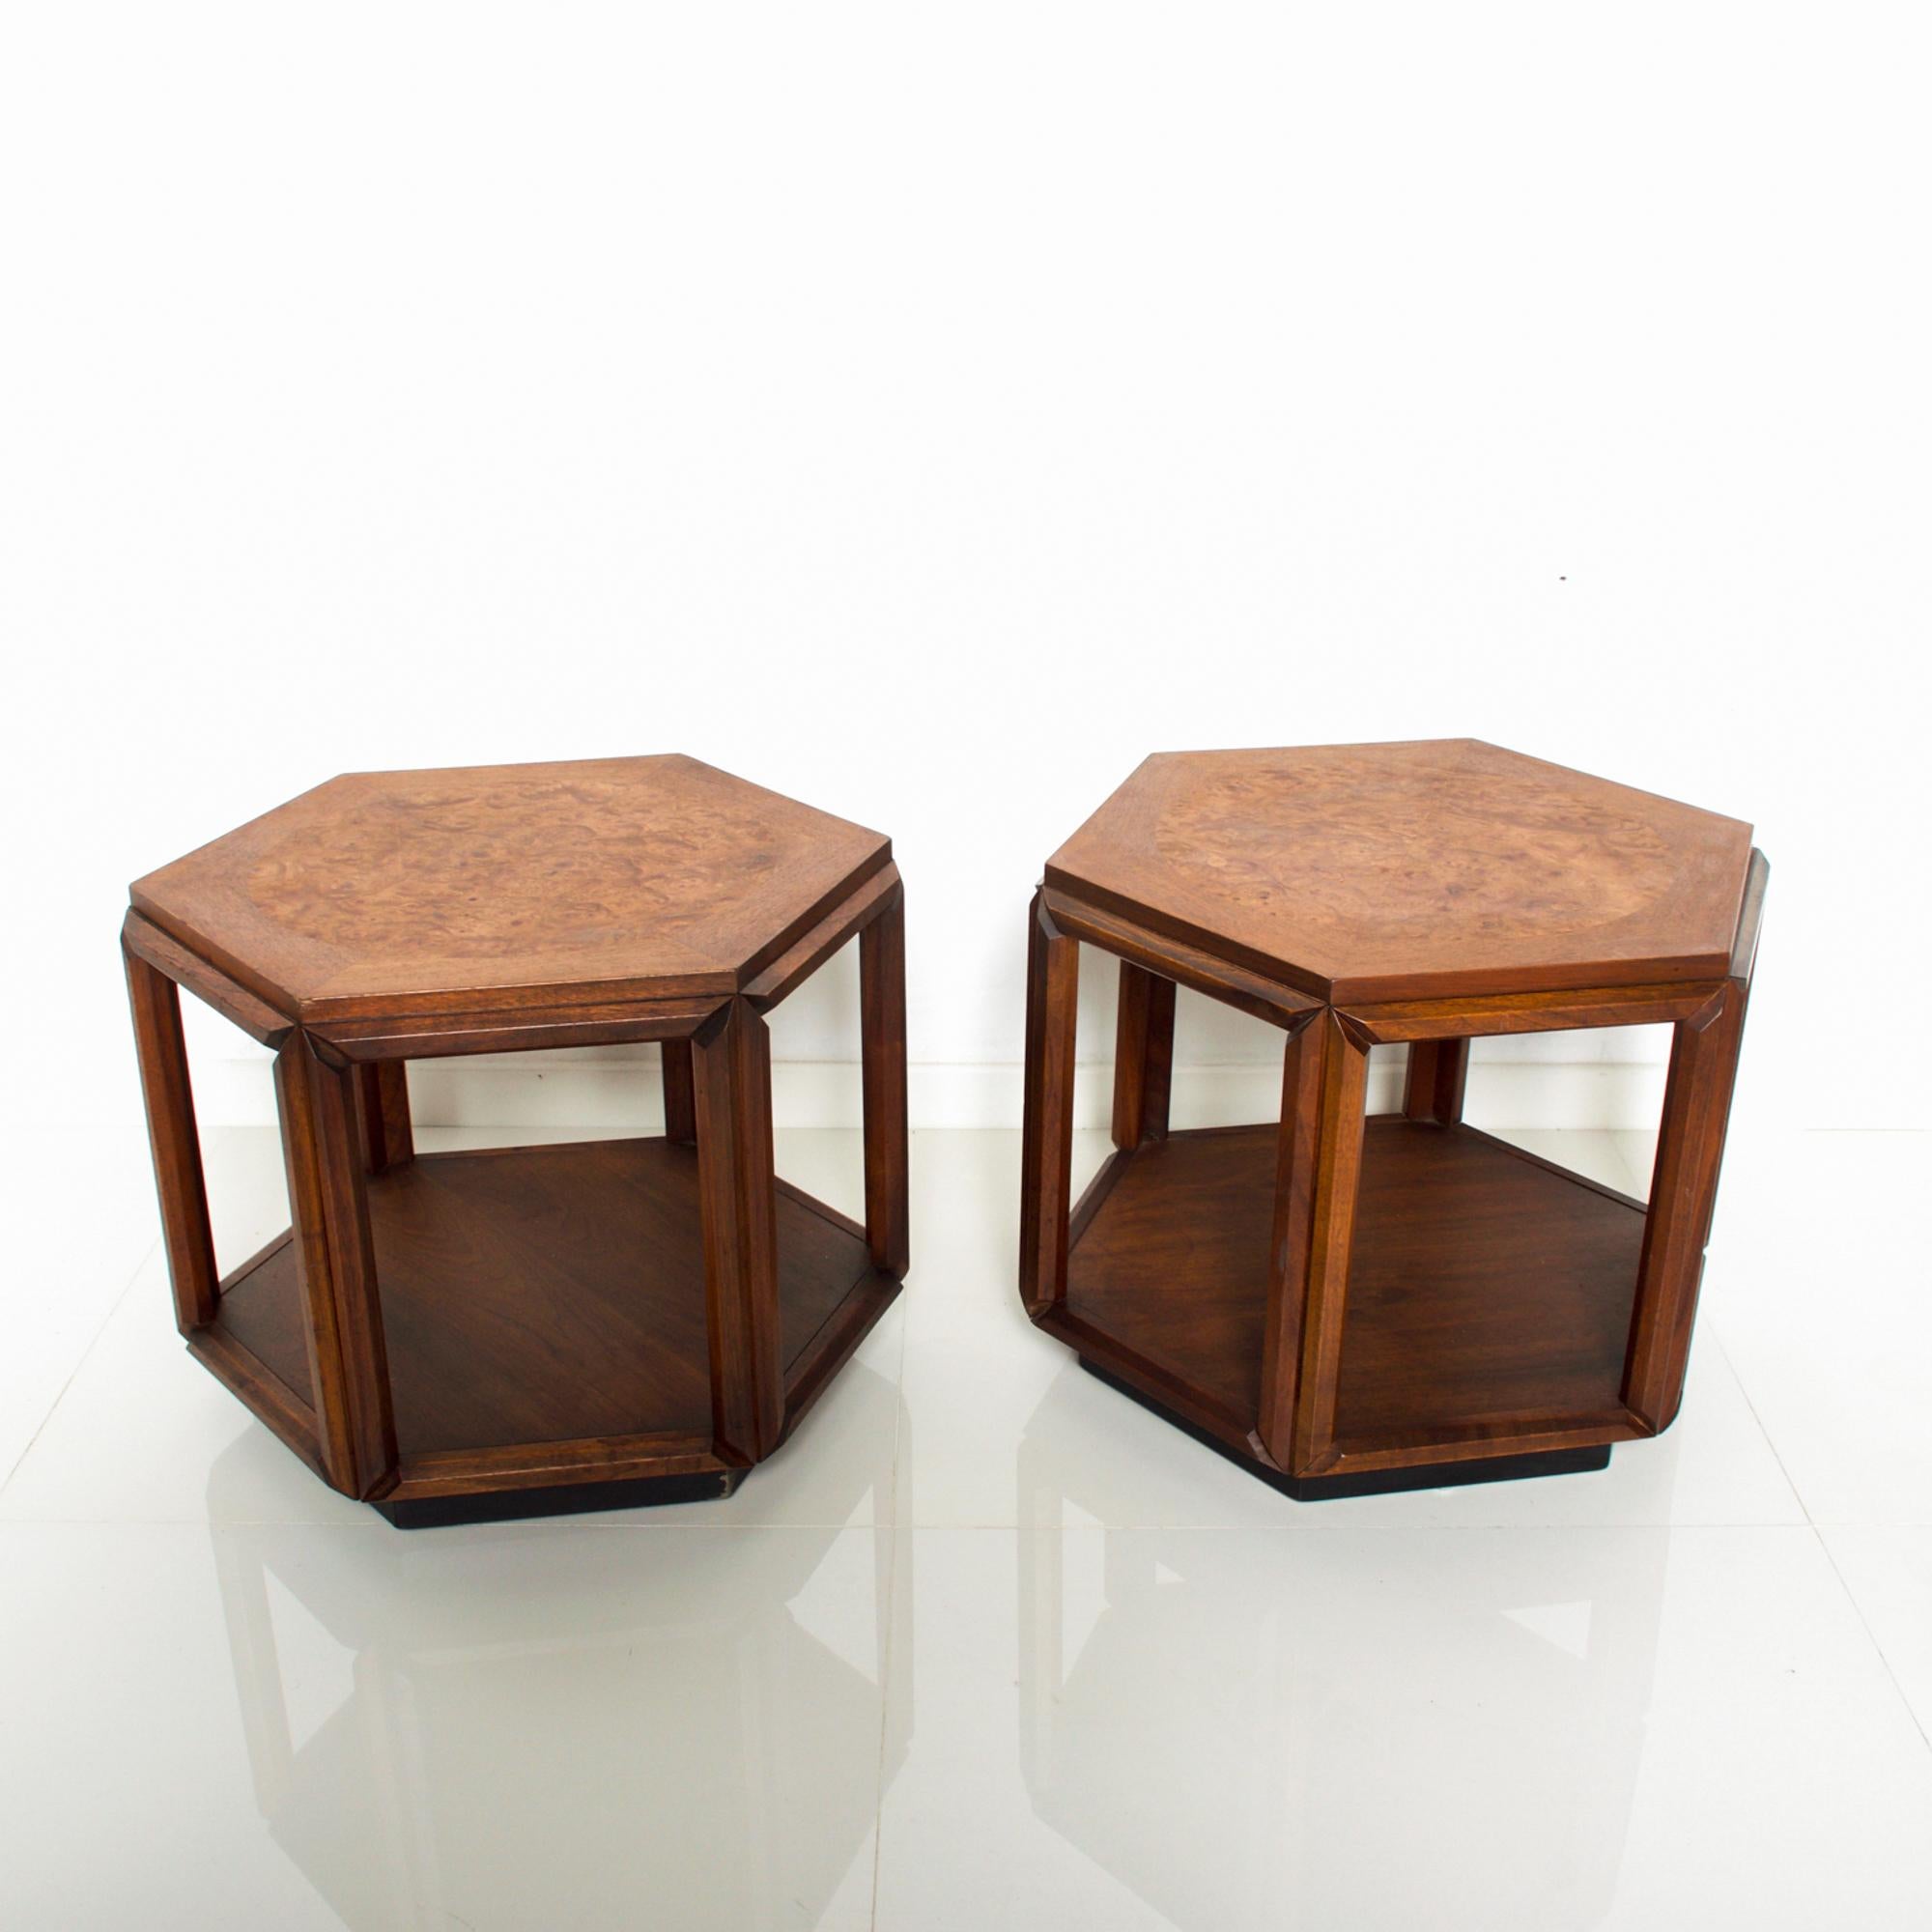 Midcentury Classic pair of hexagonal side tables in walnut wood & burlwood, designer John Keal for Brown Saltman USA 1960s
Table top has circular shape burl wood inlay at center. One table retains original label.
Dimensions: 15.5 height x 20.5